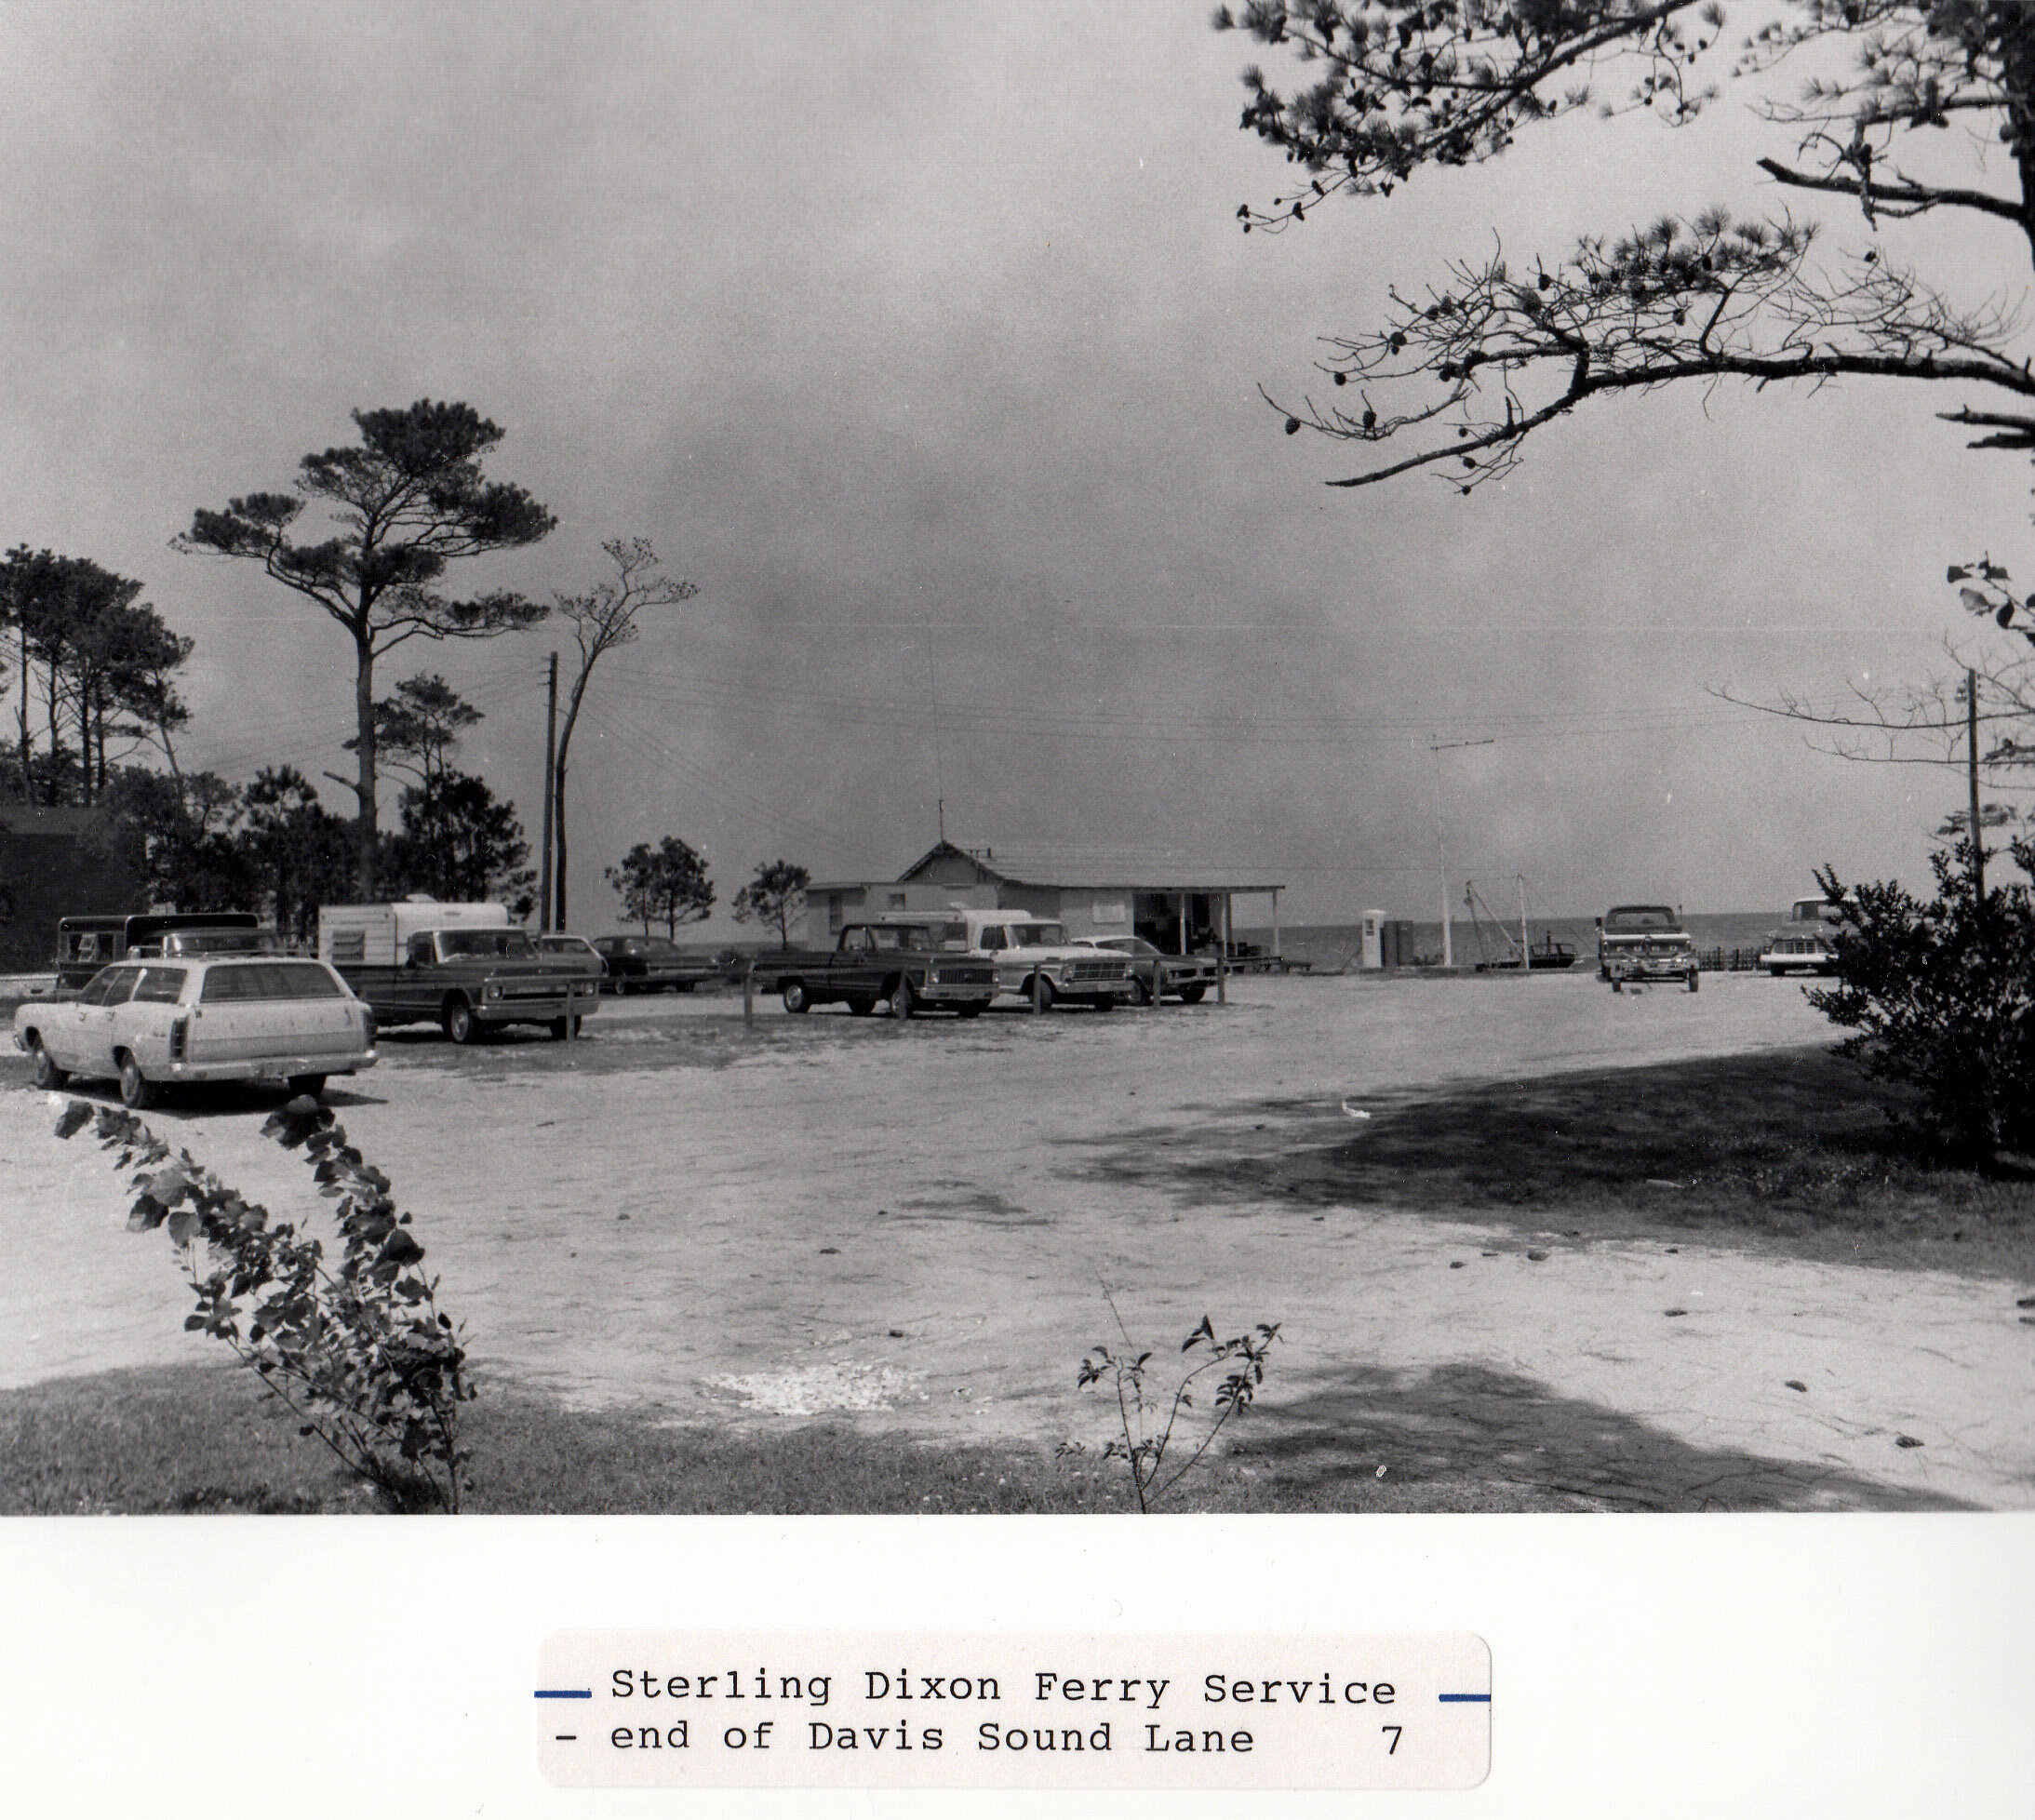  Sterling Dixon's Ferry Service at the end of Davis Sound Lane. 